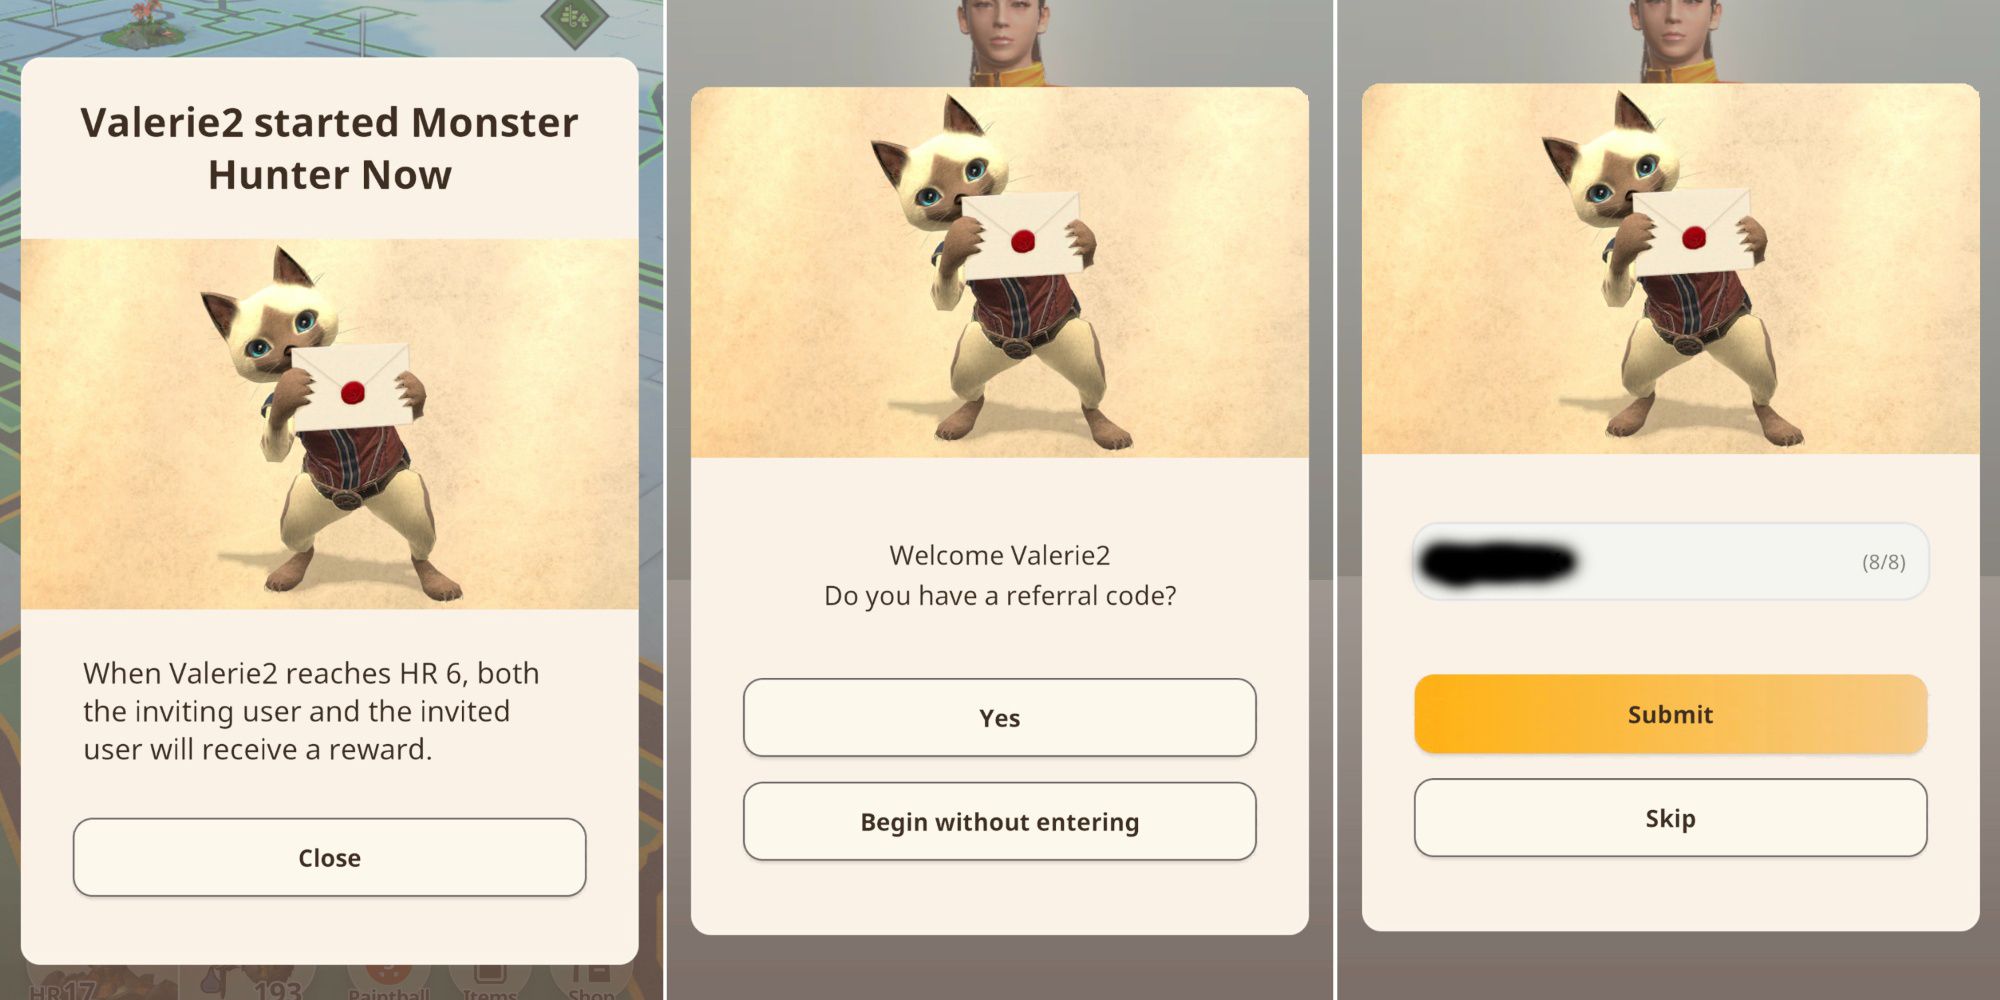 How To Use Referral Codes in Monster Hunter Now